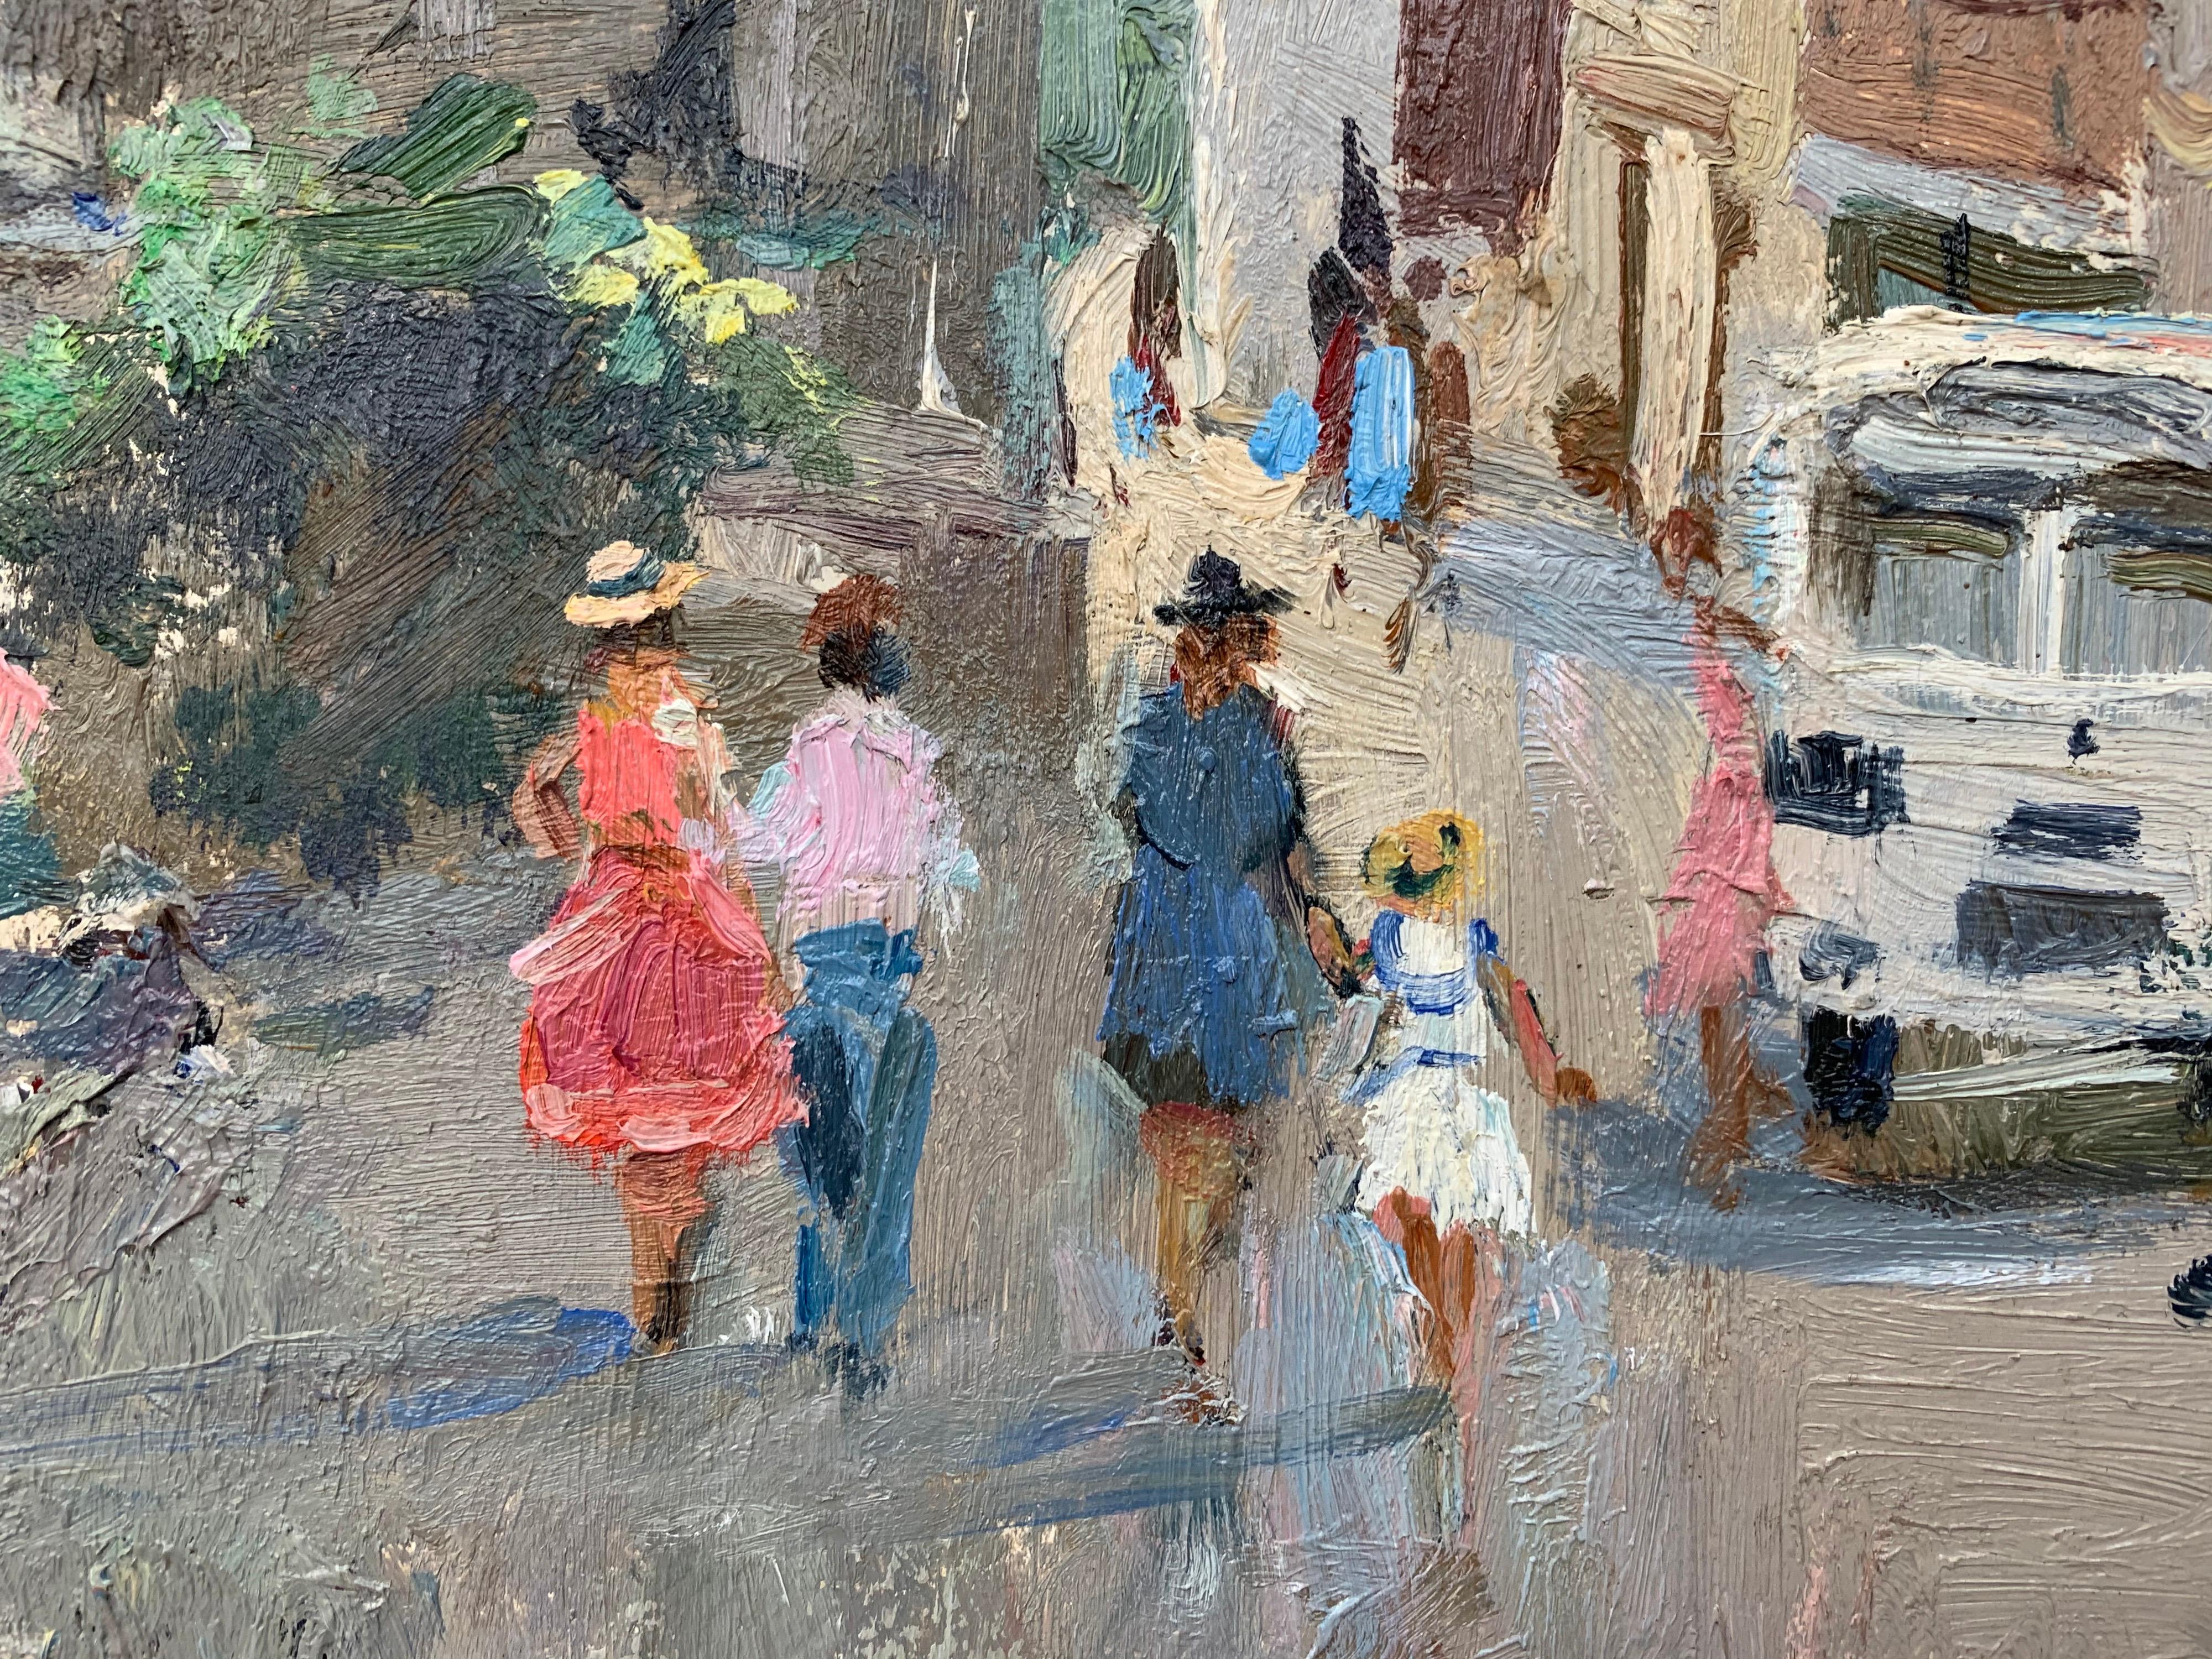 Impressionistic Street Scene with Figures in Aloupak Crimea by Russian Artist - Gray Landscape Painting by Anatoliy Lukash